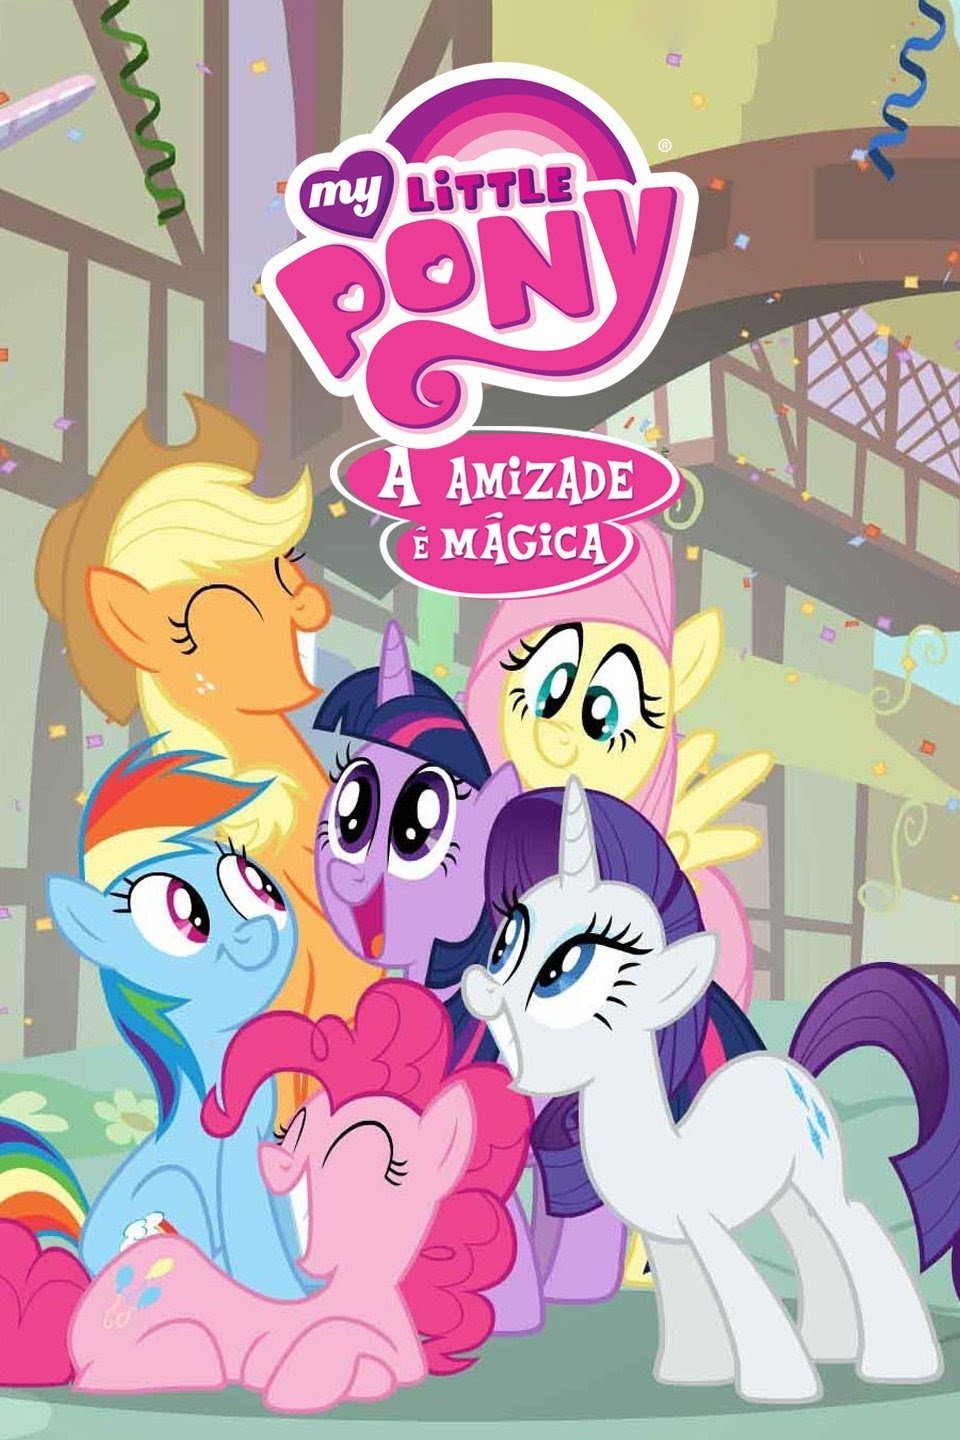 My Little Pony: Friendship Is Magic, The Dubbing Database